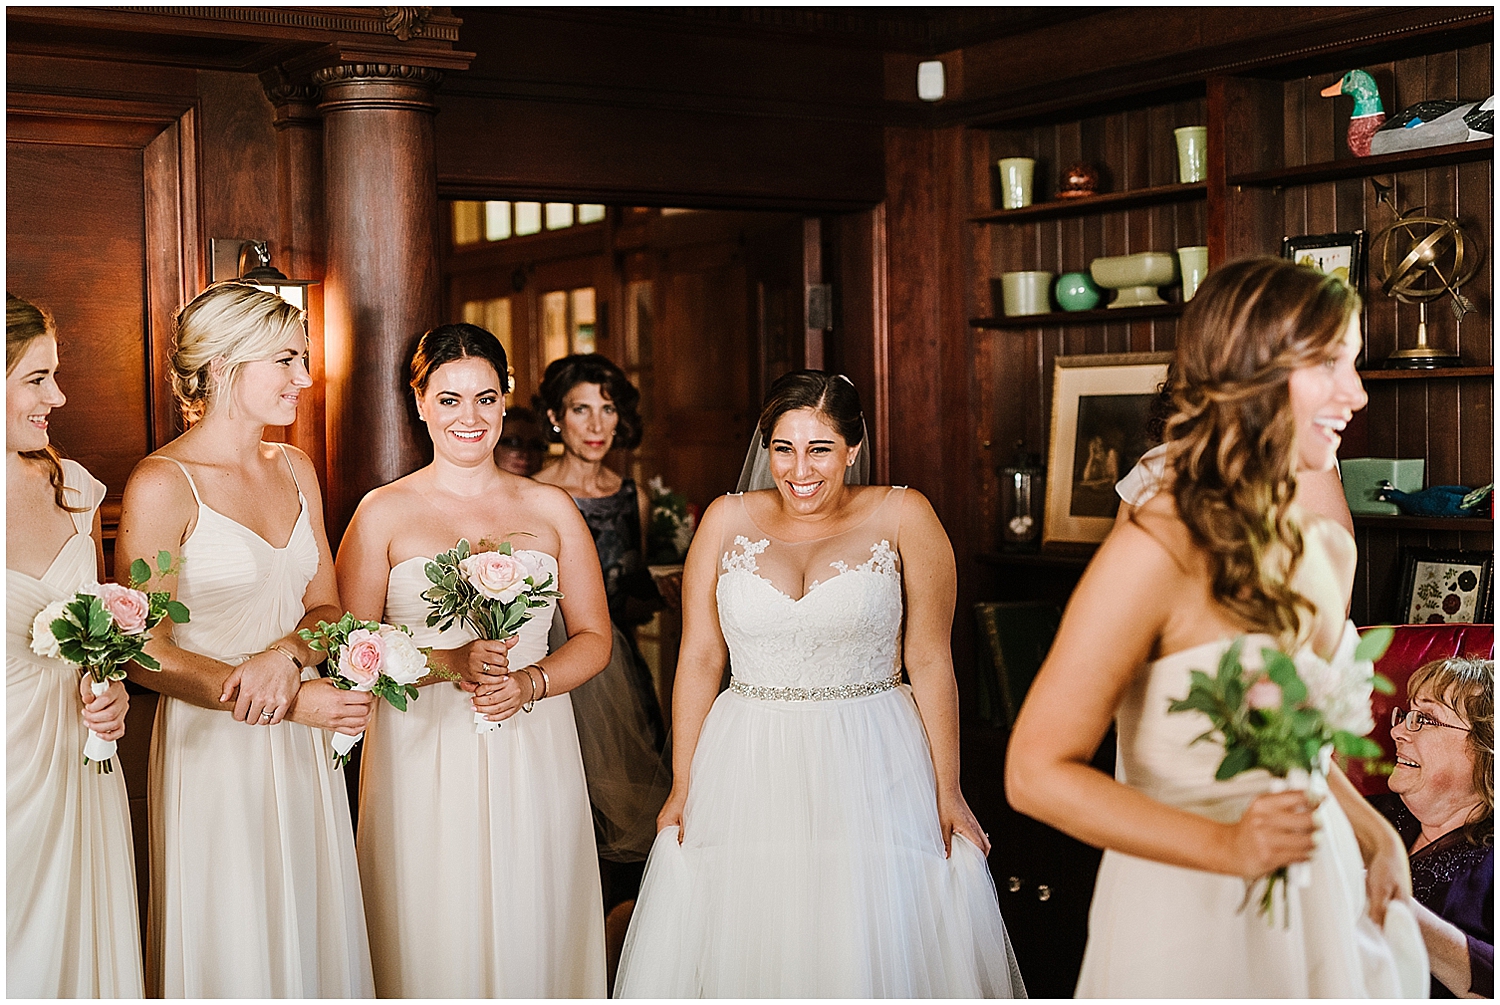 Emotional & Intimate Jewish Wedding at Willowdale Estate in Topsfield, MA by Boston Wedding Photographer Annmarie Swift